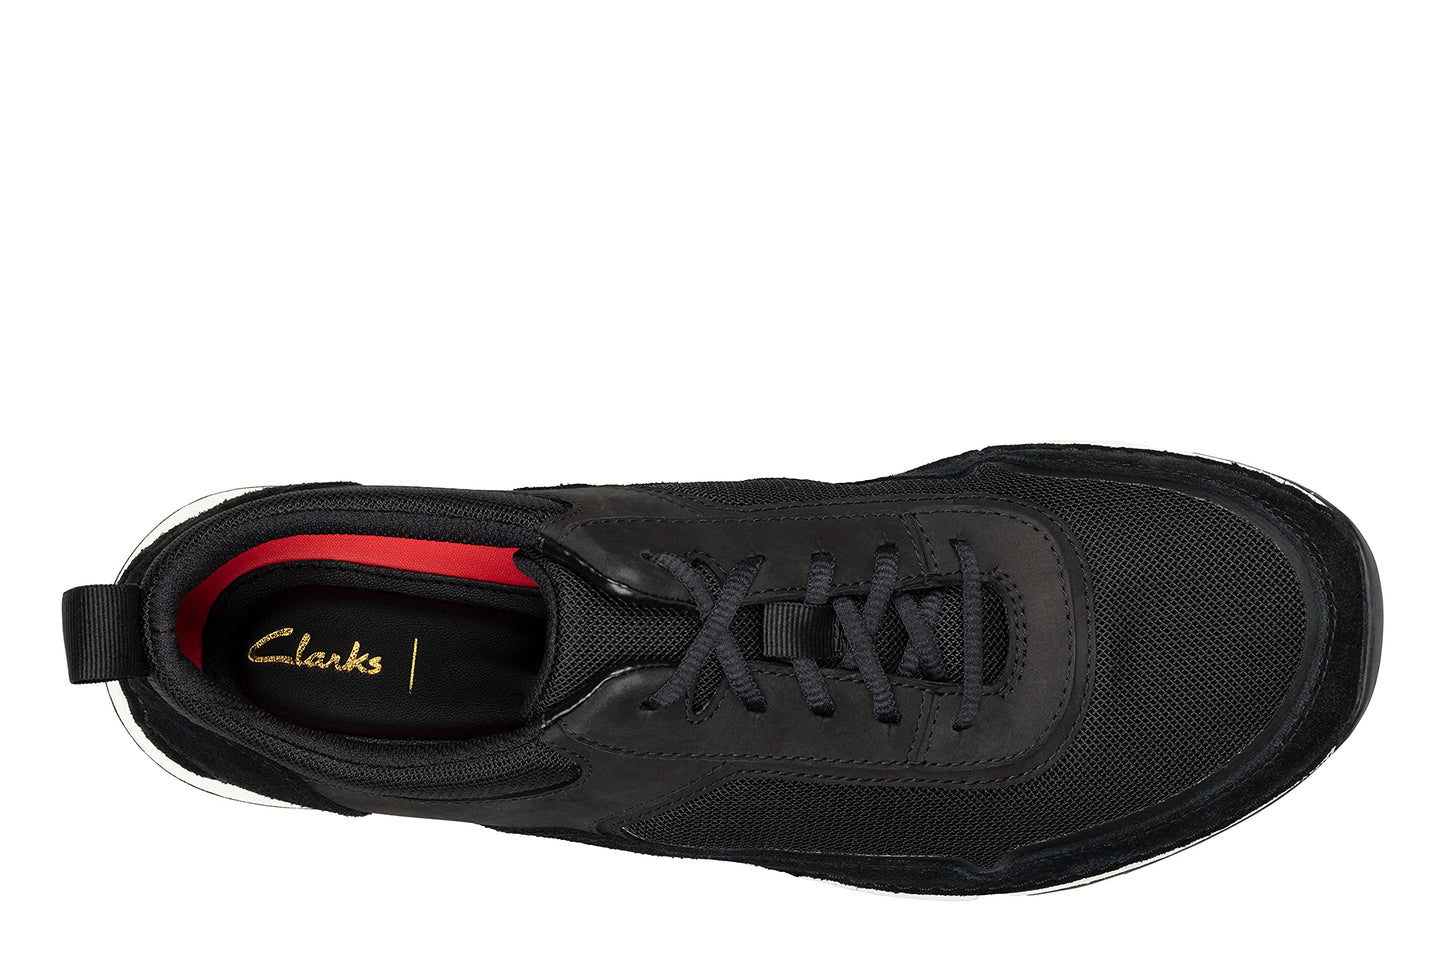 Clarks Black Combi Coloured Mens Casual Lace up (Size: 10)-26152459 